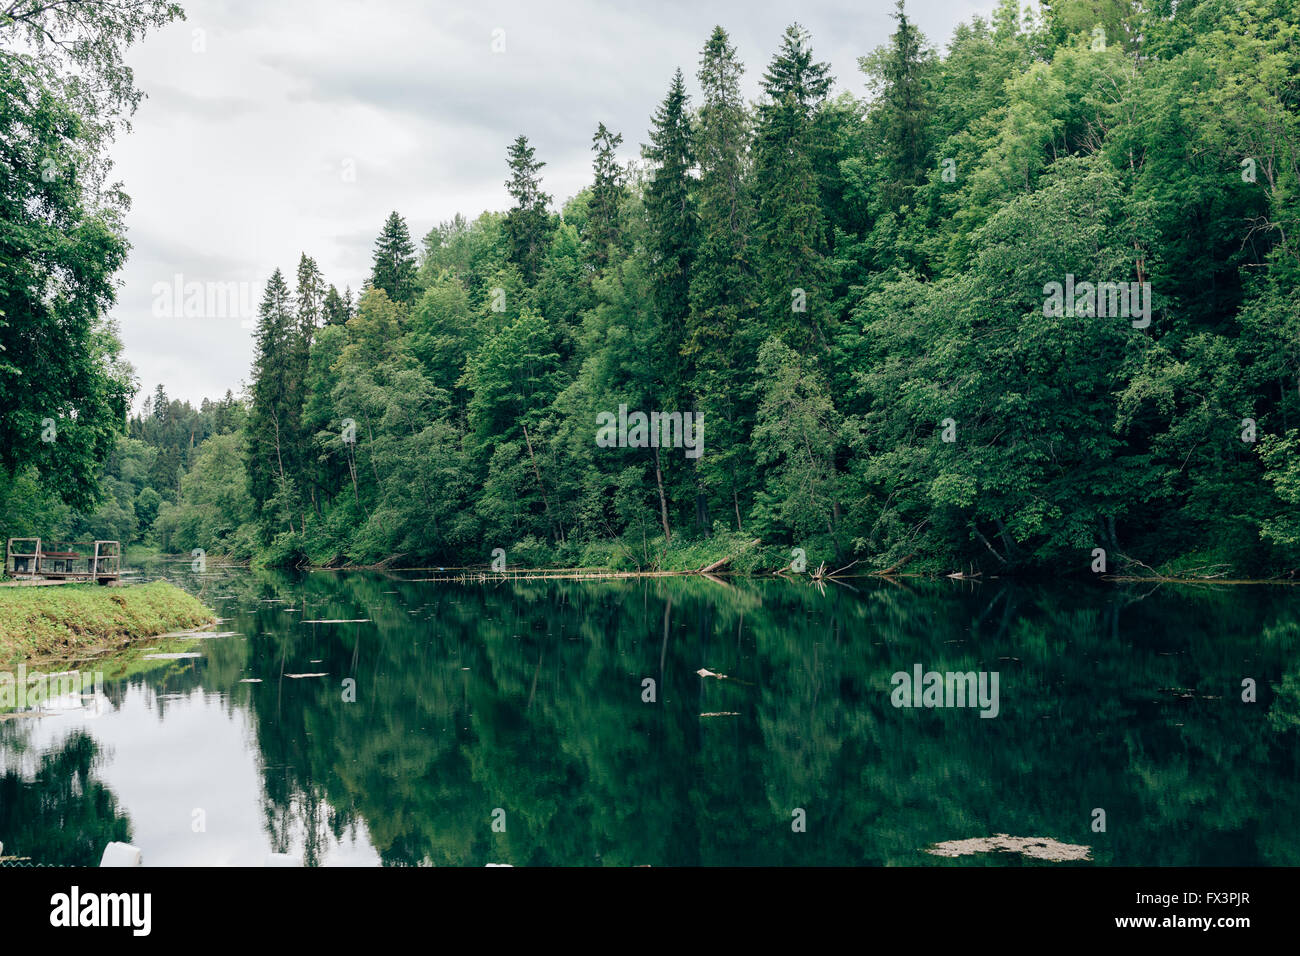 Beautiful landscape with a lake and a green forest. Stock Photo